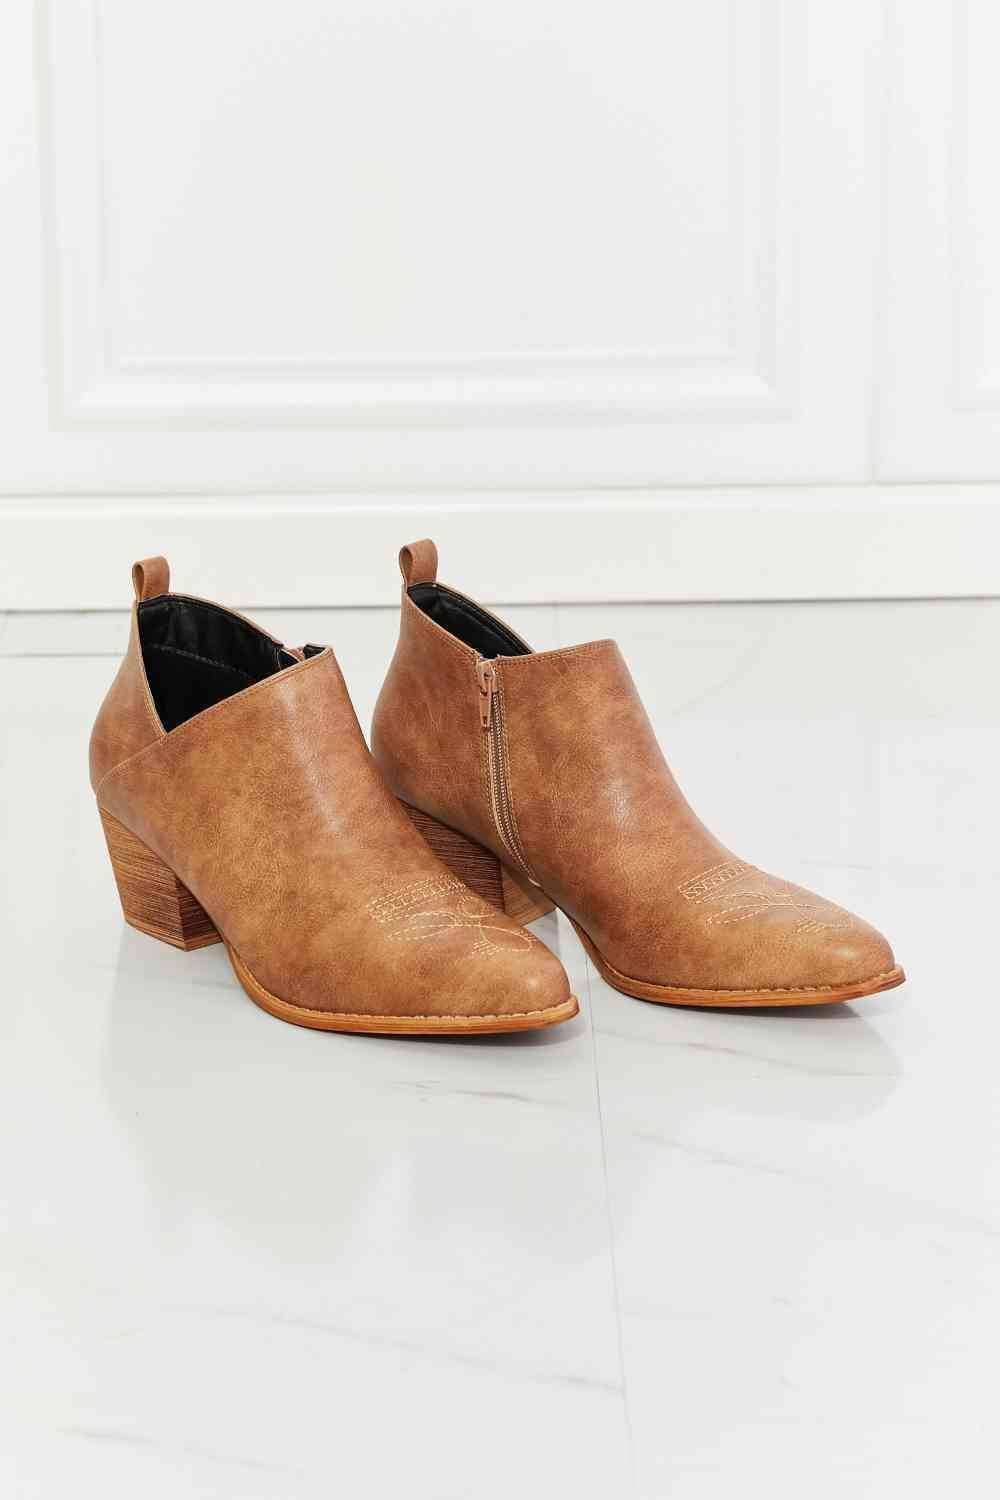 MMShoes Trust Yourself Cowboy Bootie